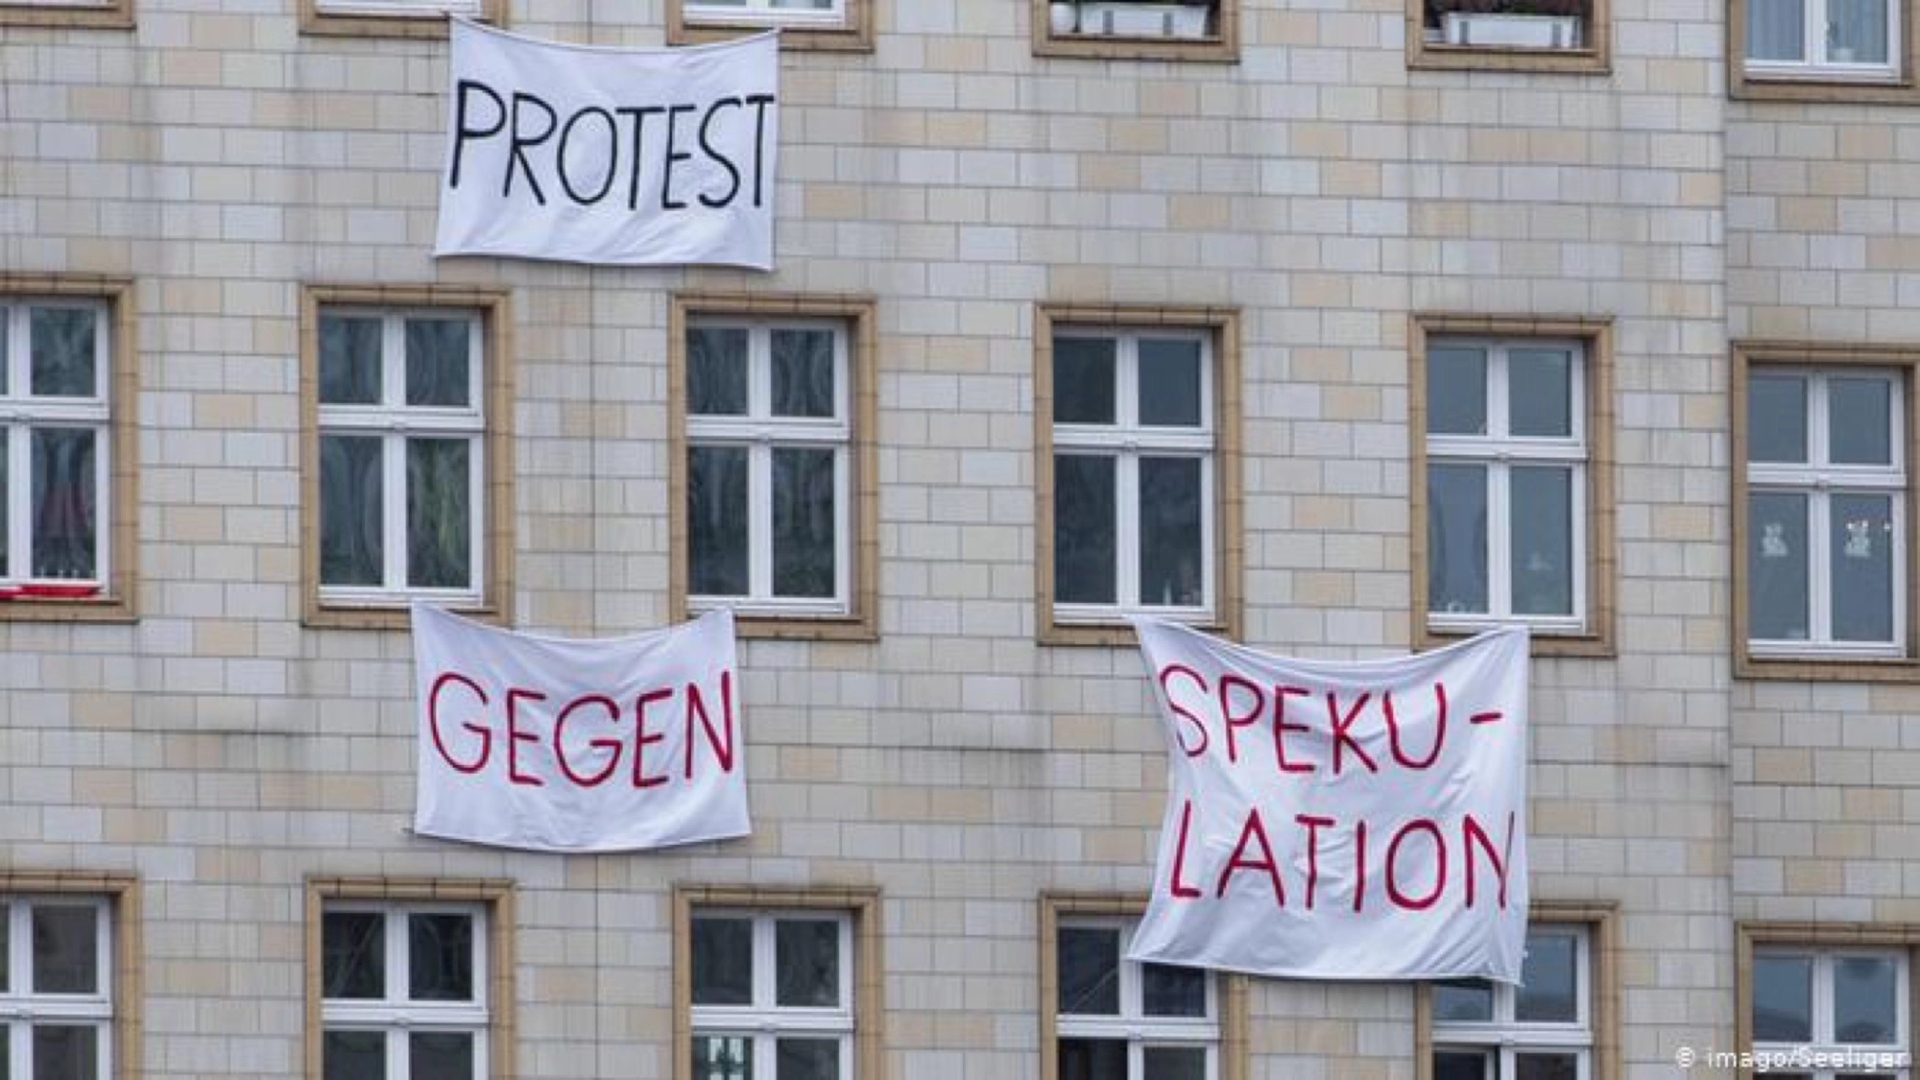 Activists protest speculation in Berlin's housing market.